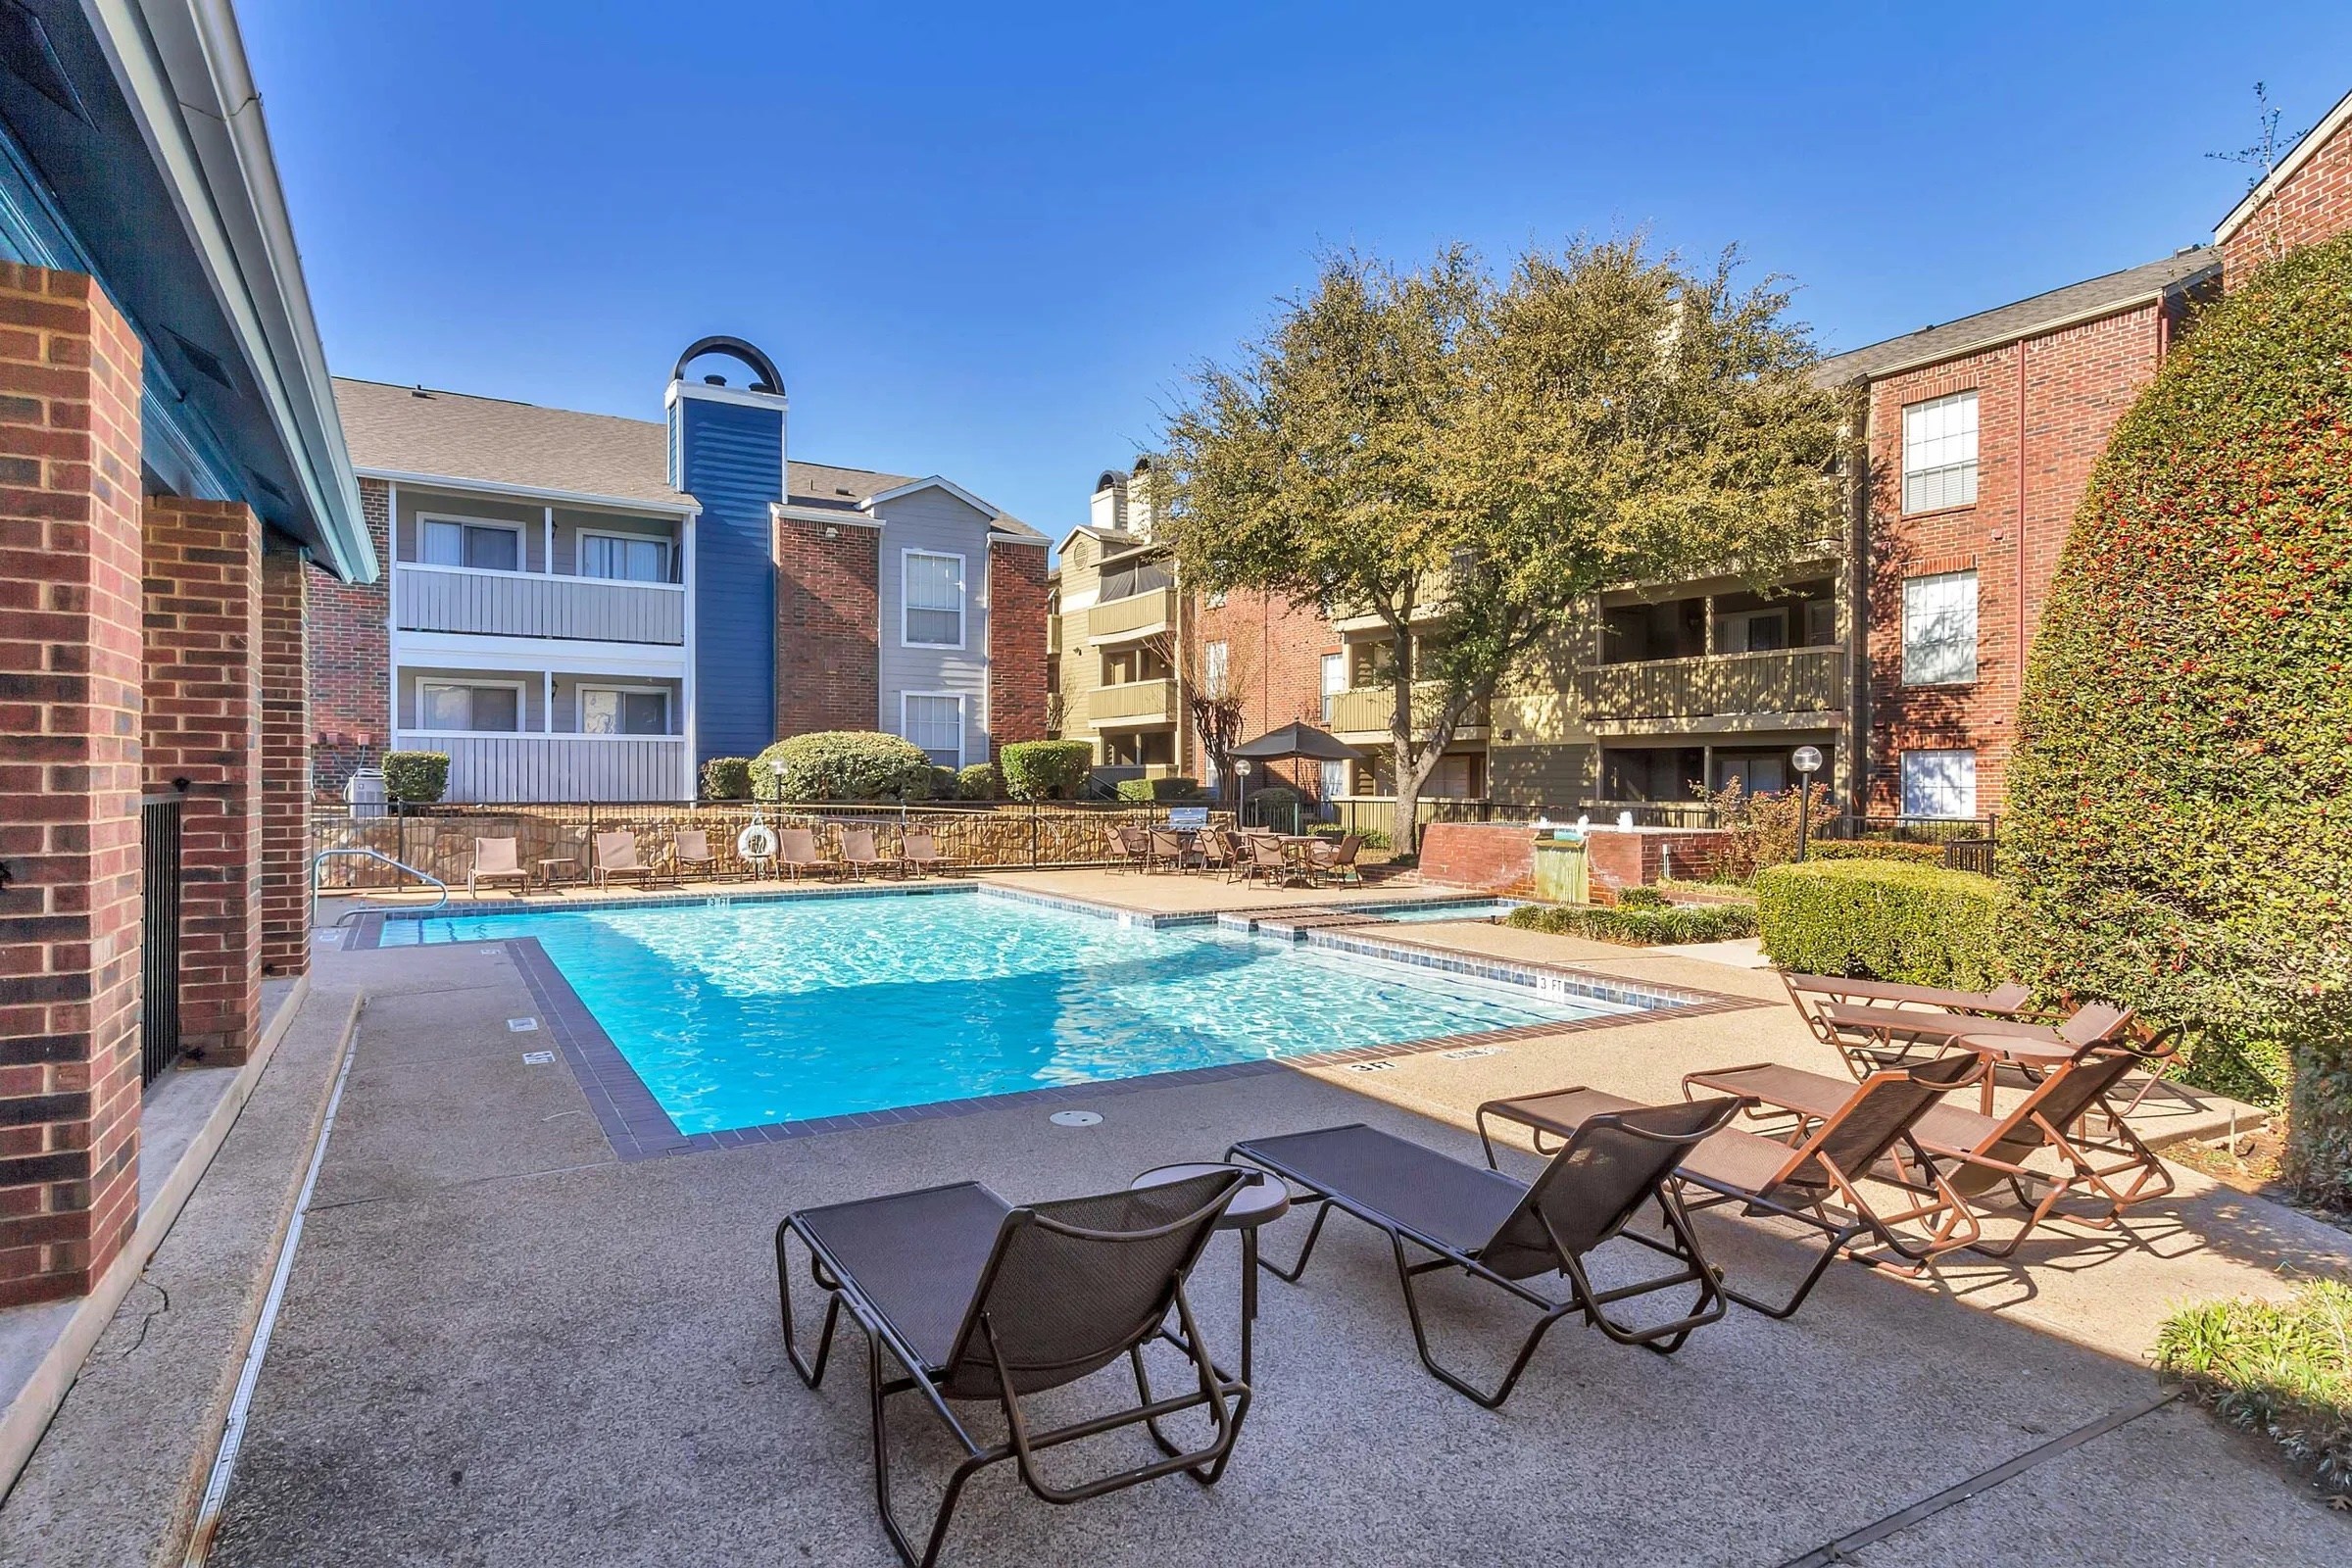 Cottonwood Group and Texsun Holdings Acquire Woodstone and Bridge Hollow Apartment Communities in Fort Worth